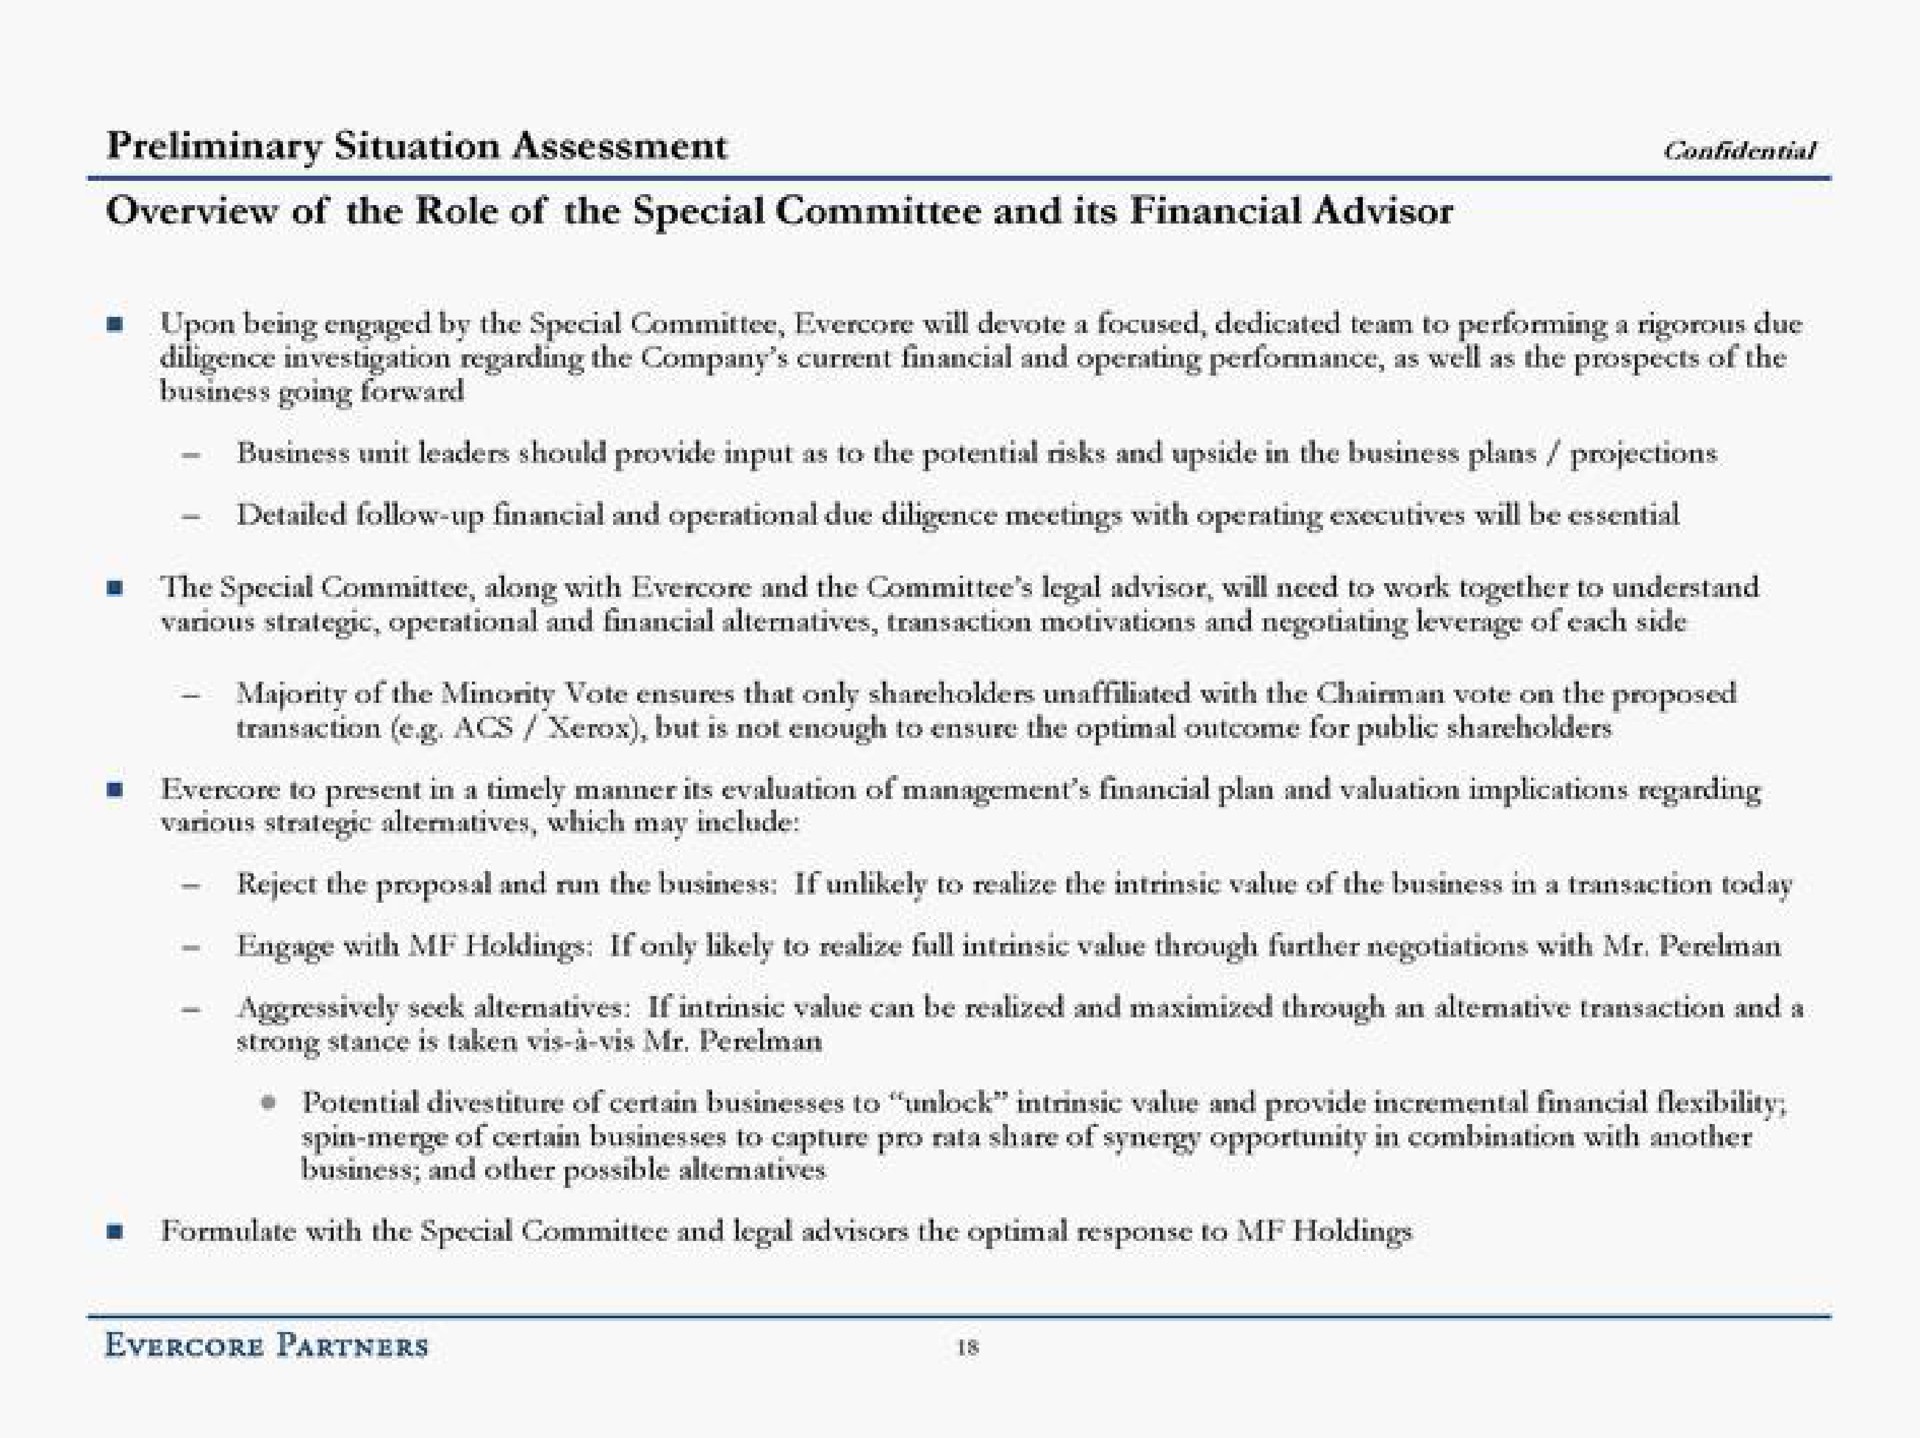 preliminary situation assessment confidential overview of the role of the special committee and its financial advisor | Evercore